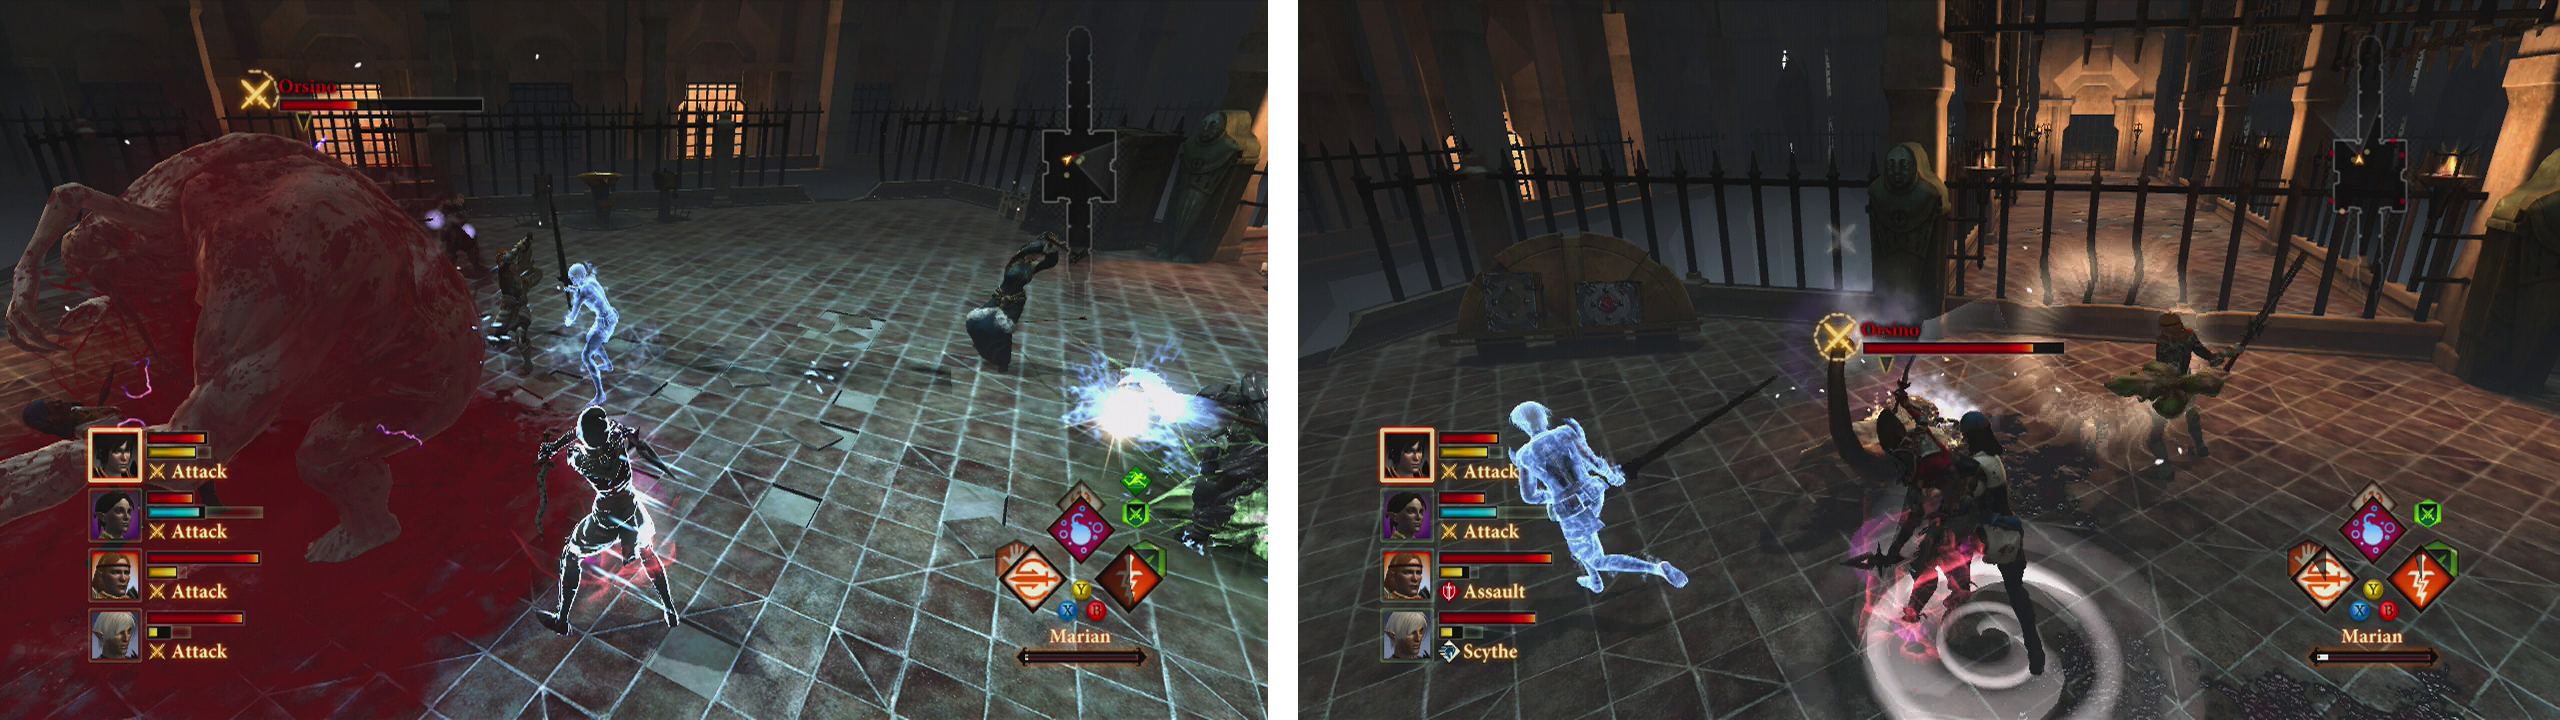 During the first phase, focus on dishiong out damage on Orsino (left) the second phase sees a smaller version of the boss that can teleport and summon enemies (right).